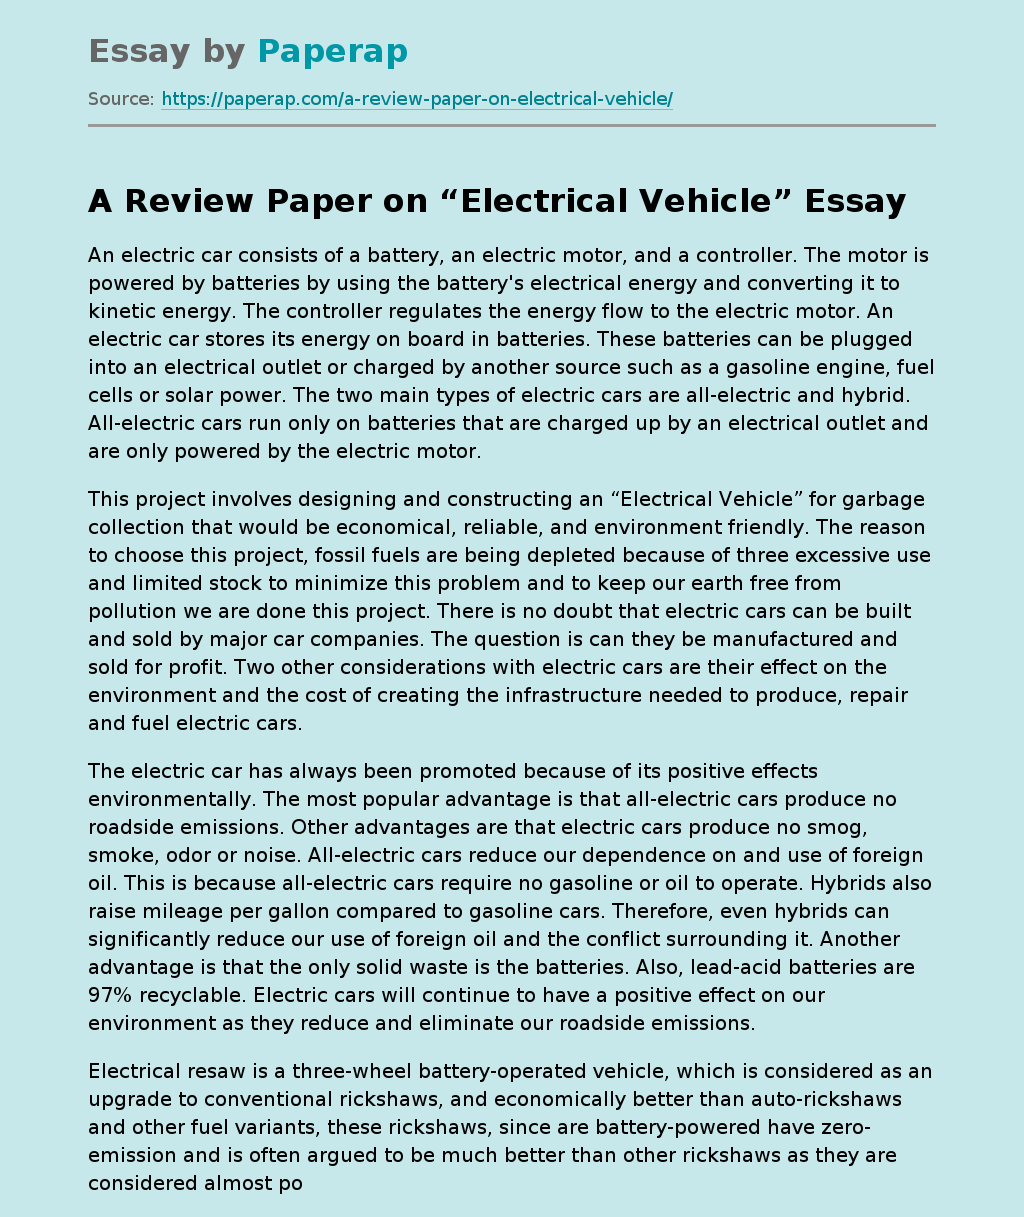 A Review Paper on “Electrical Vehicle”